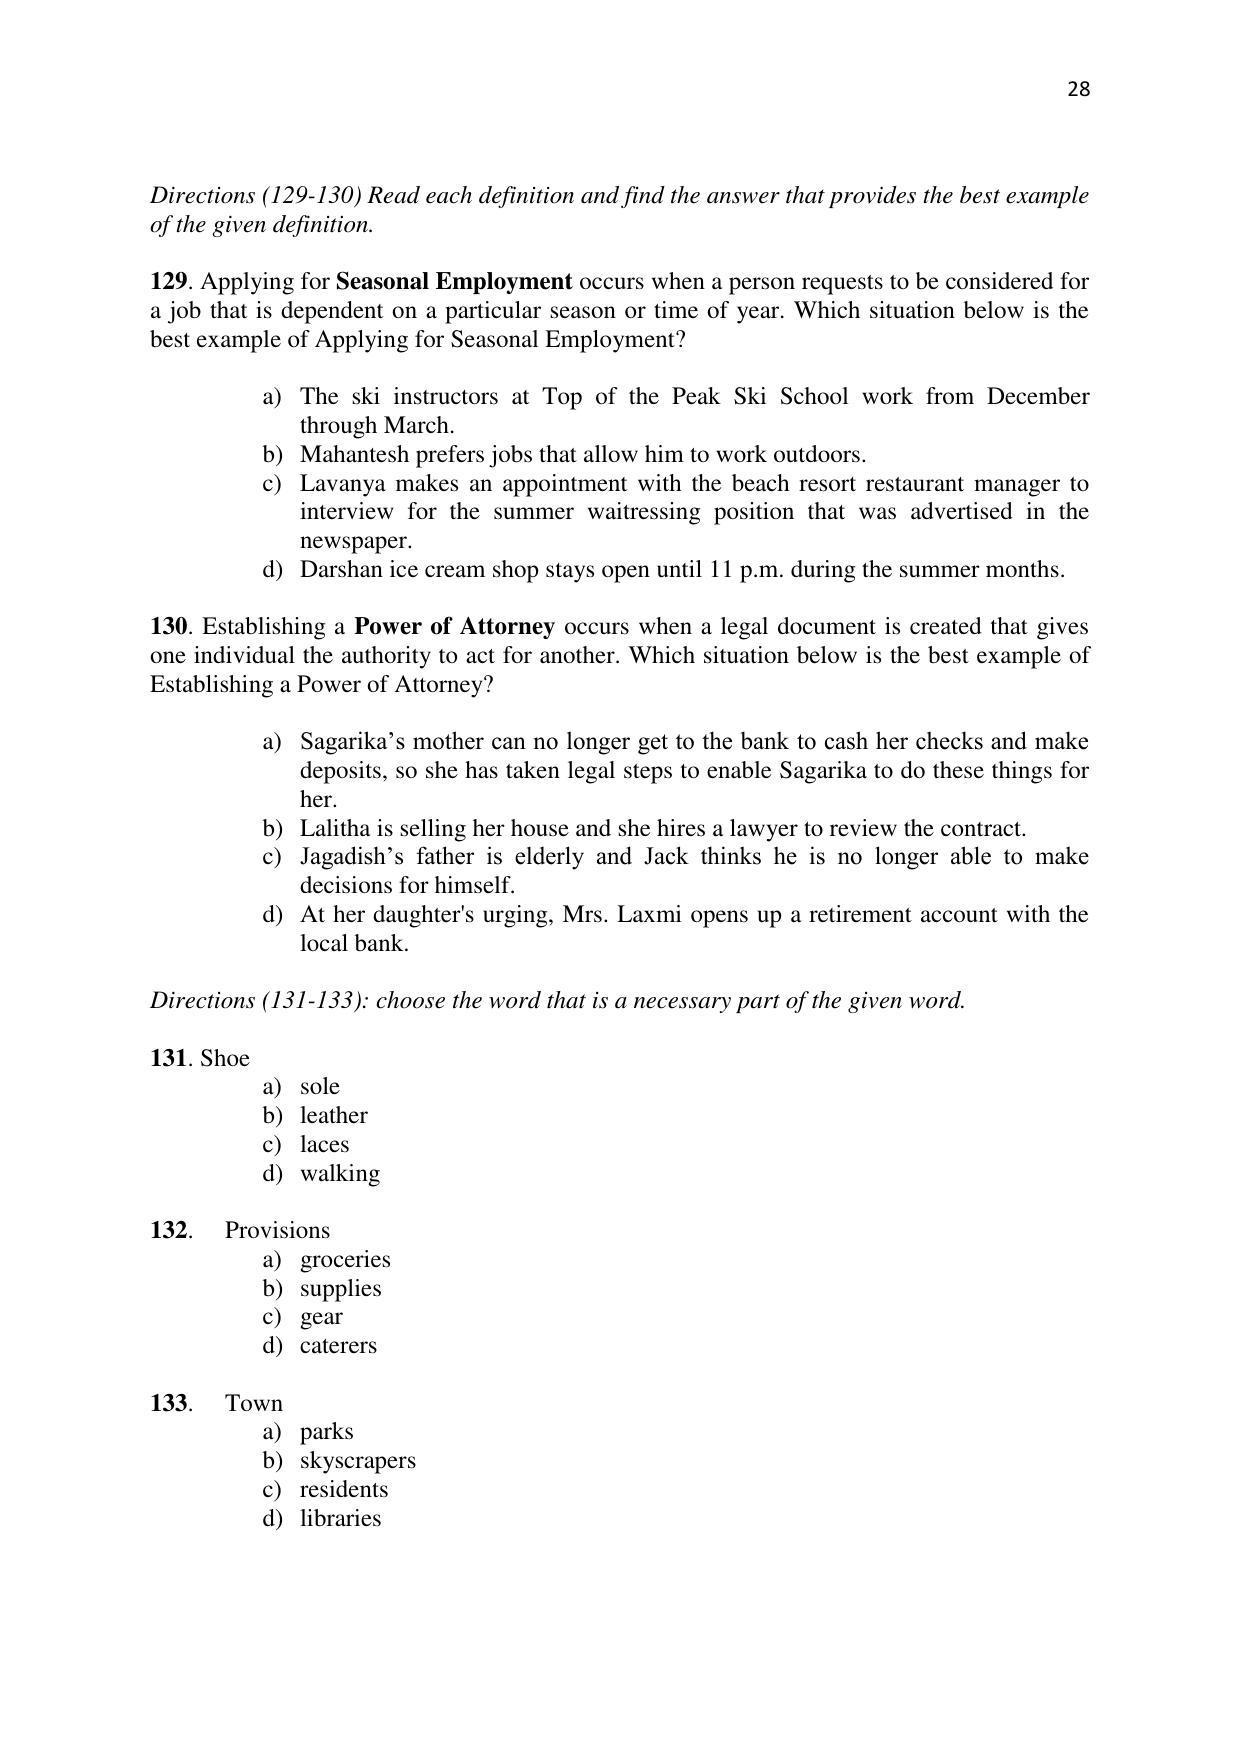 KMAT Question Papers - November 2016 - Page 28